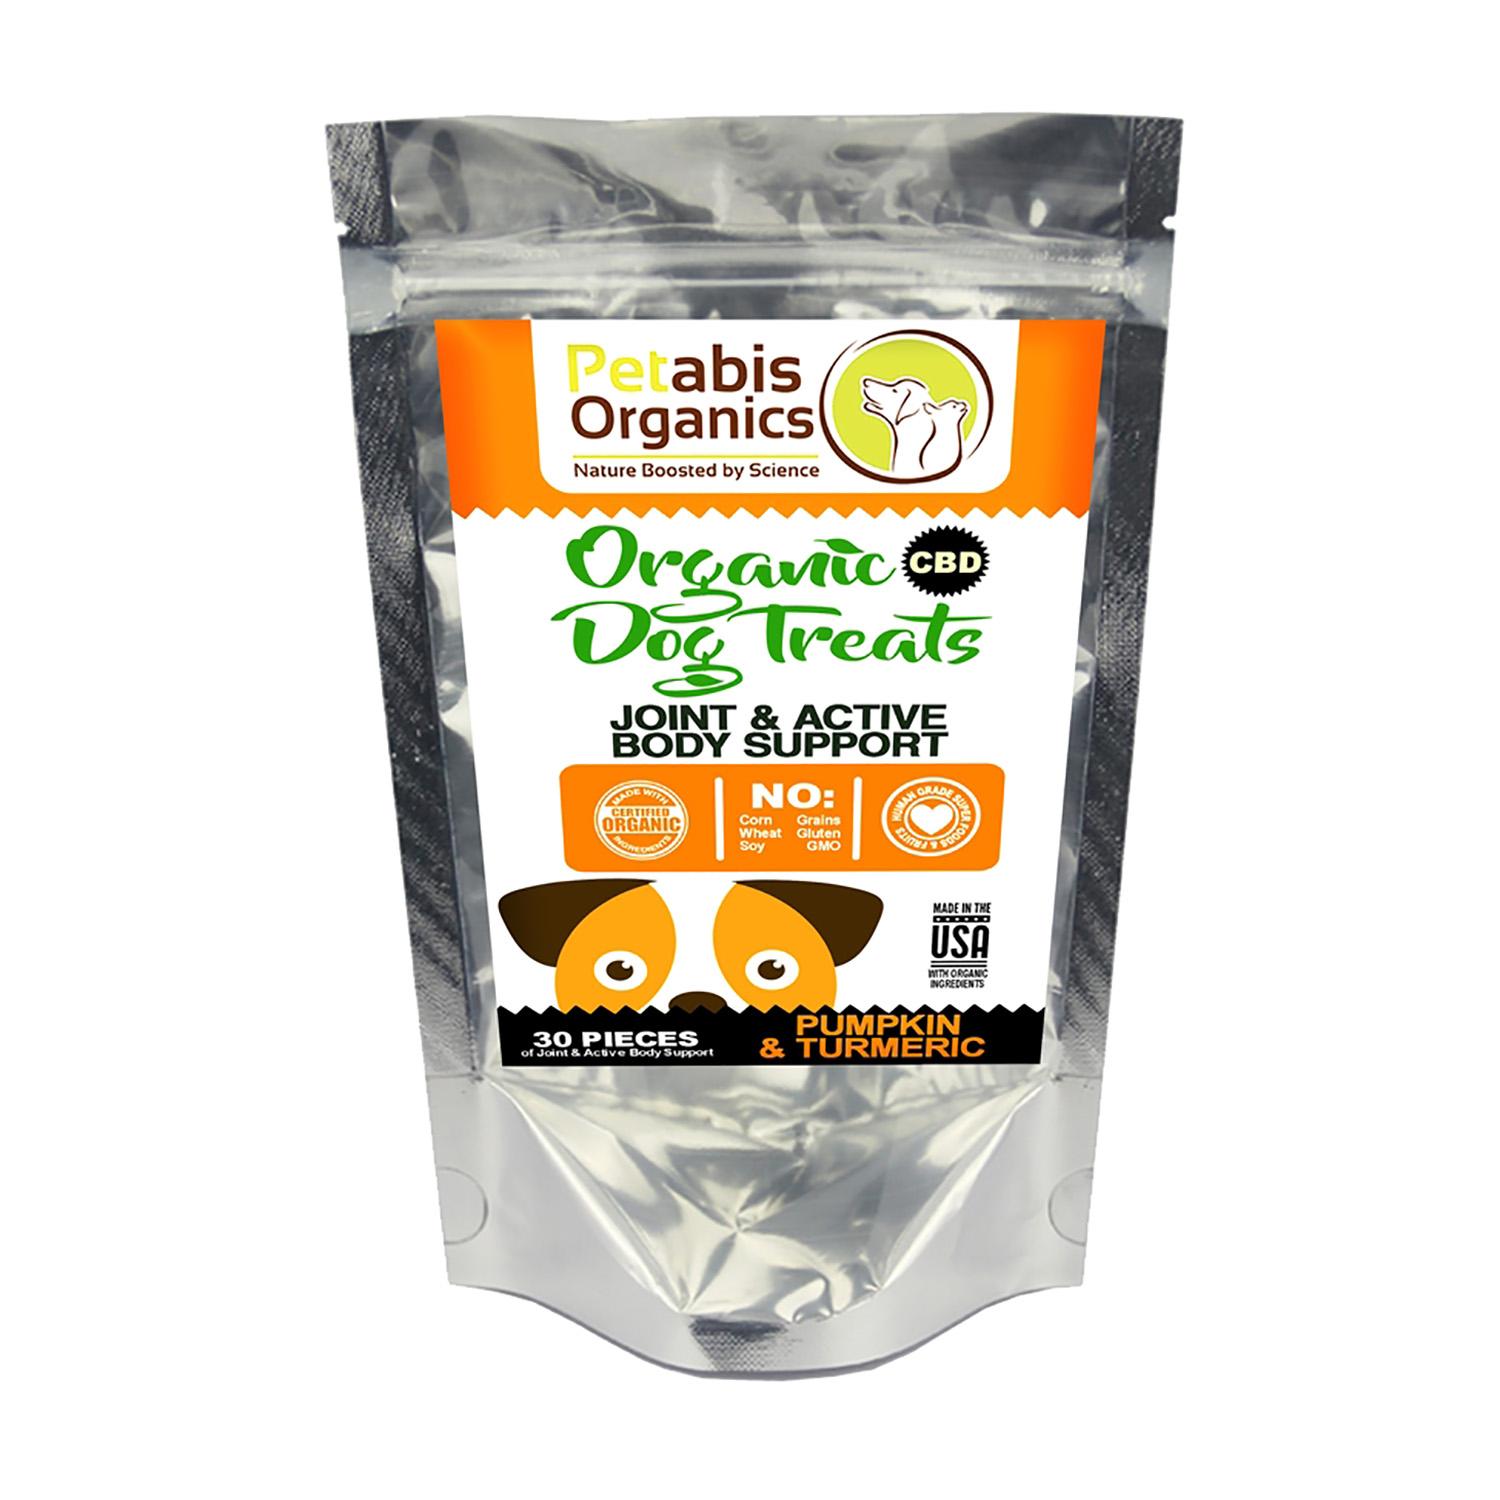 Petabis Joint and Active Body Support CBD Dog Treats - Pumpkin and Turmeric